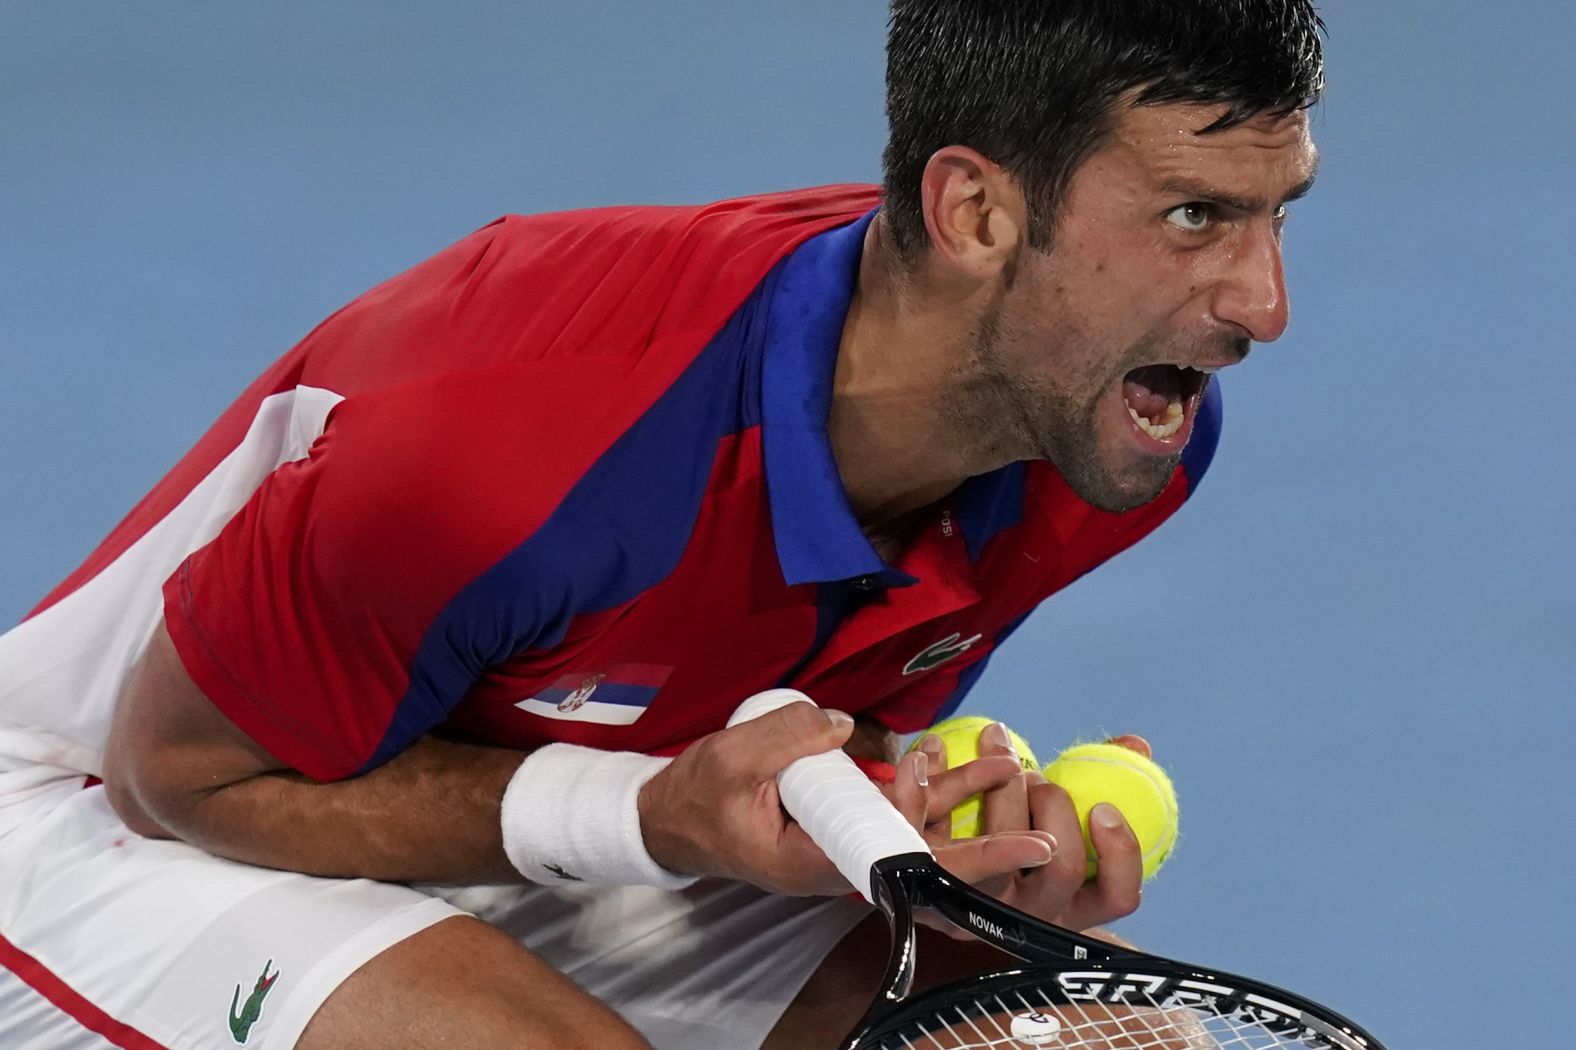 The world's top-ranked tennis player, Serbia's Novak Djokovic, reacts during his semifinal match against Germany's Alexander Zverev on Friday, July 30. Zverev won 1-6, 6-3, 6-1, ending Djokovic's <a href="index.php?page=&url=https%3A%2F%2Fwww.cnn.com%2Fworld%2Flive-news%2Ftokyo-2020-olympics-07-30-21-spt%2Fh_9febcc9aa1b72eb9df5e9c8a6b60d055" target="_blank">quest for a "Golden Slam."</a> Djokovic has already won the Australian Open, the French Open and Wimbledon this year. He was looking to add an Olympic gold and then a US Open title later in the year. The only person in history to win all five in one calendar year was Steffi Graf in 1988. 